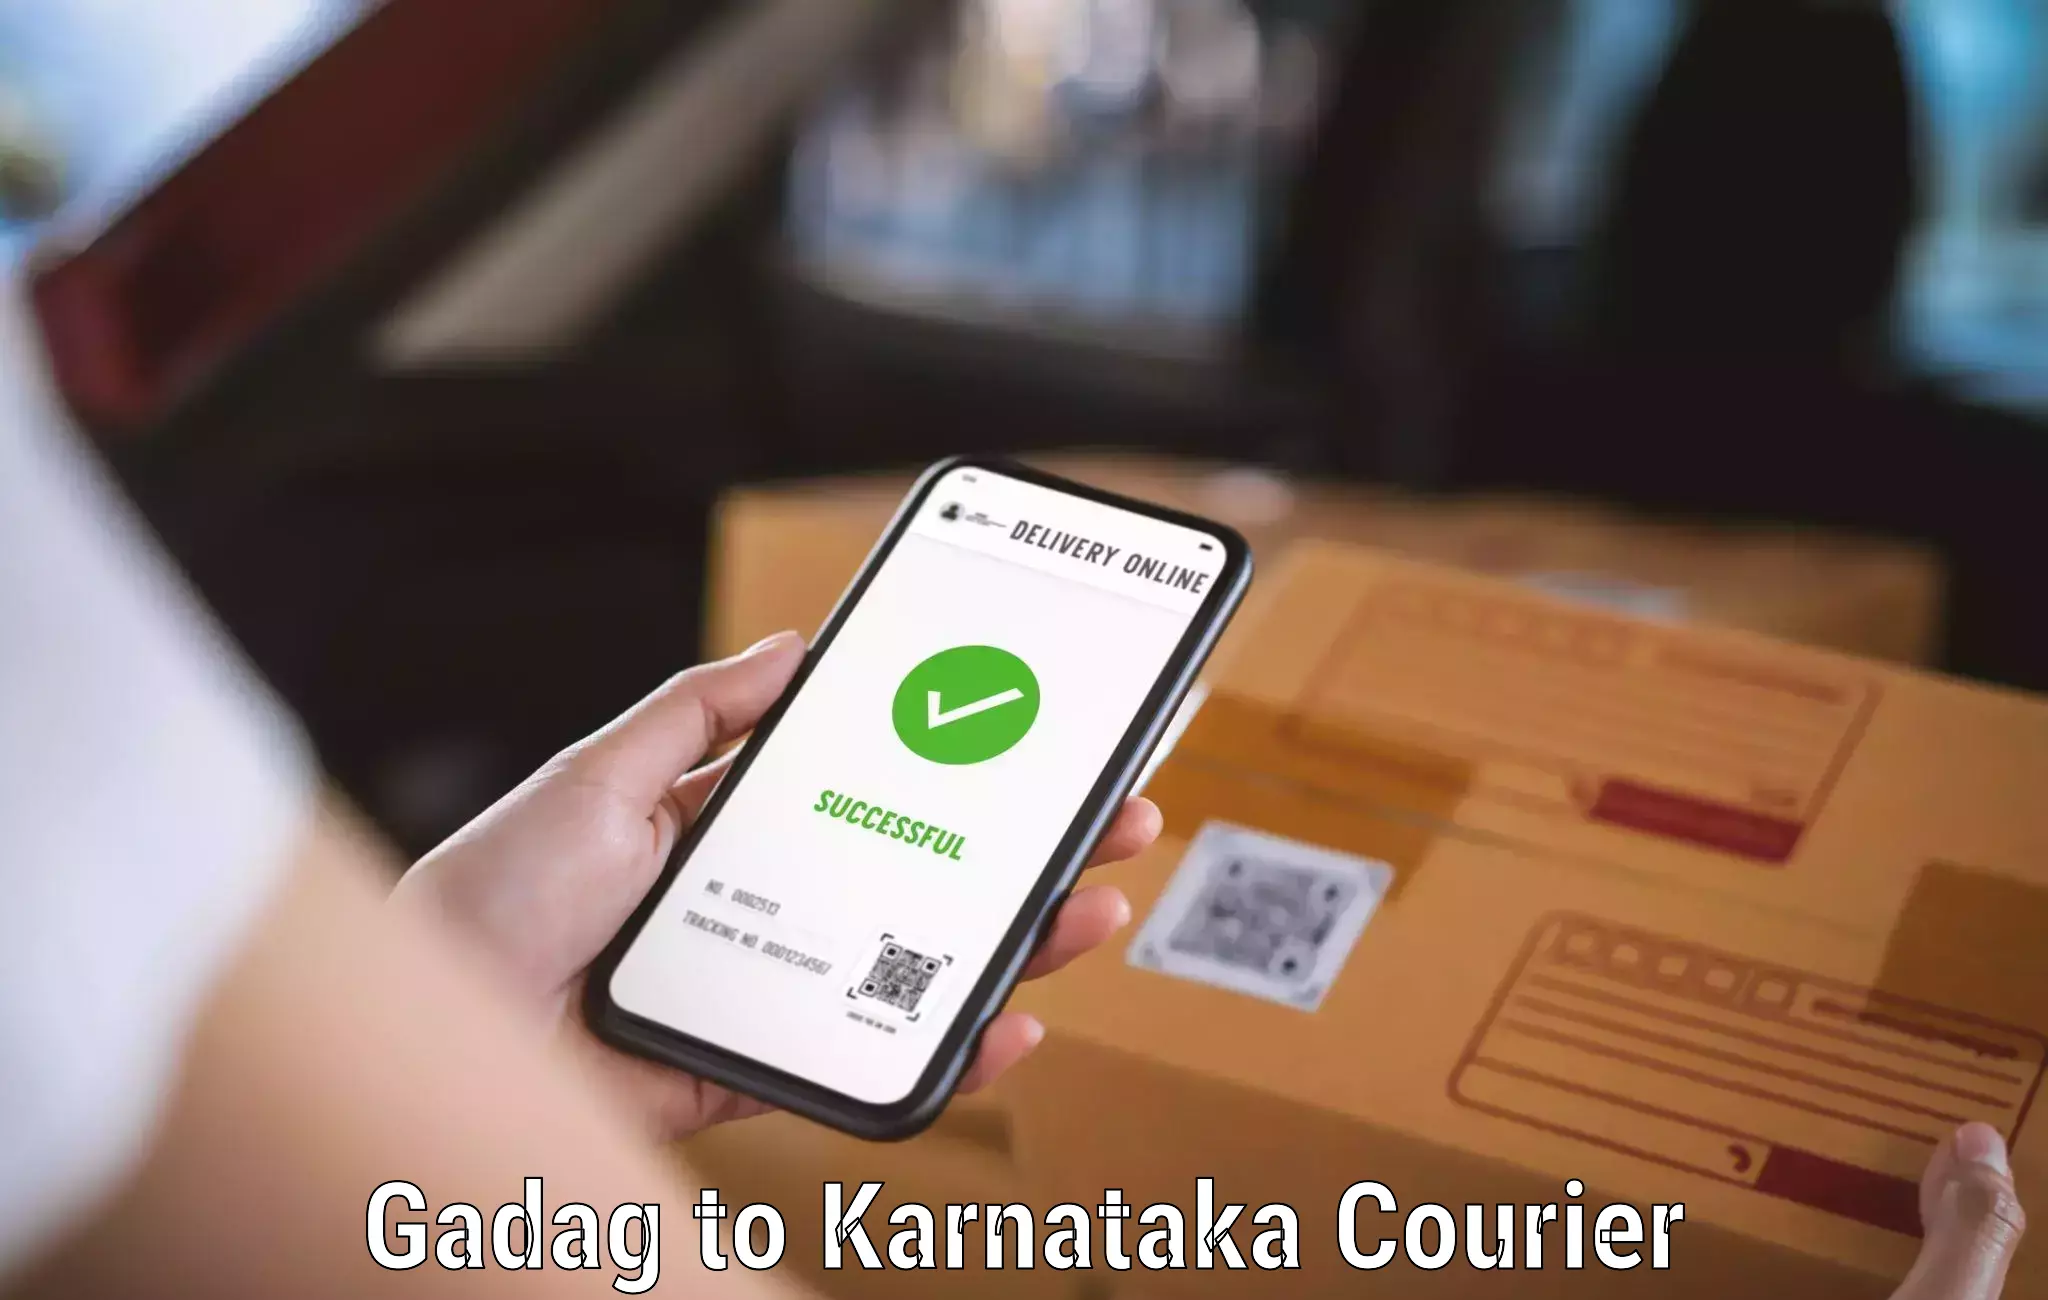 Local delivery service Gadag to Gundlupete